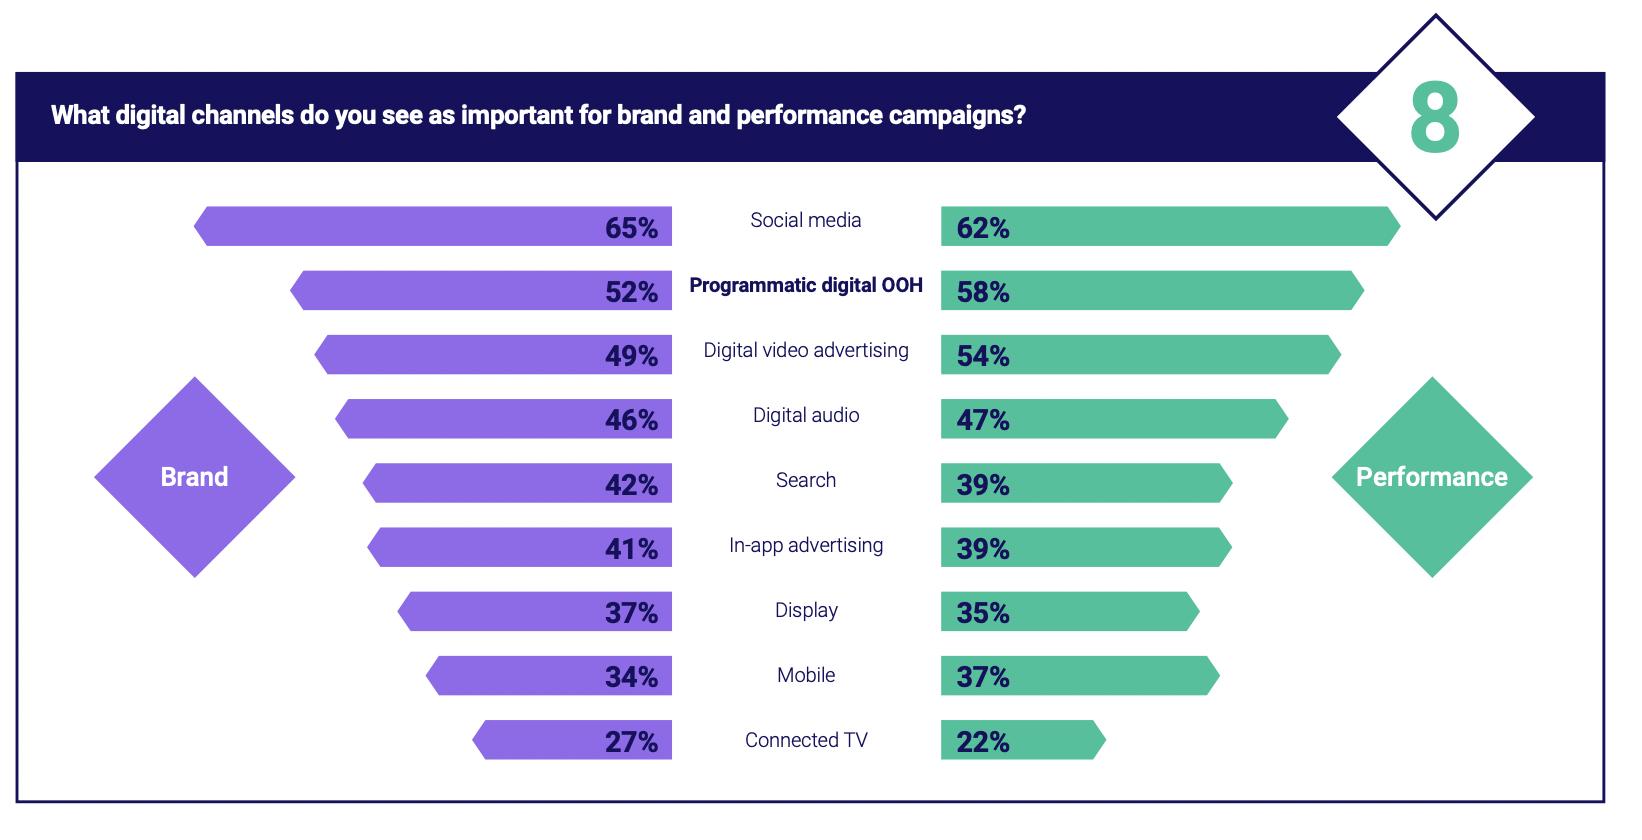 Graph detailing the digital channels voted as important for brand and performance campaigns